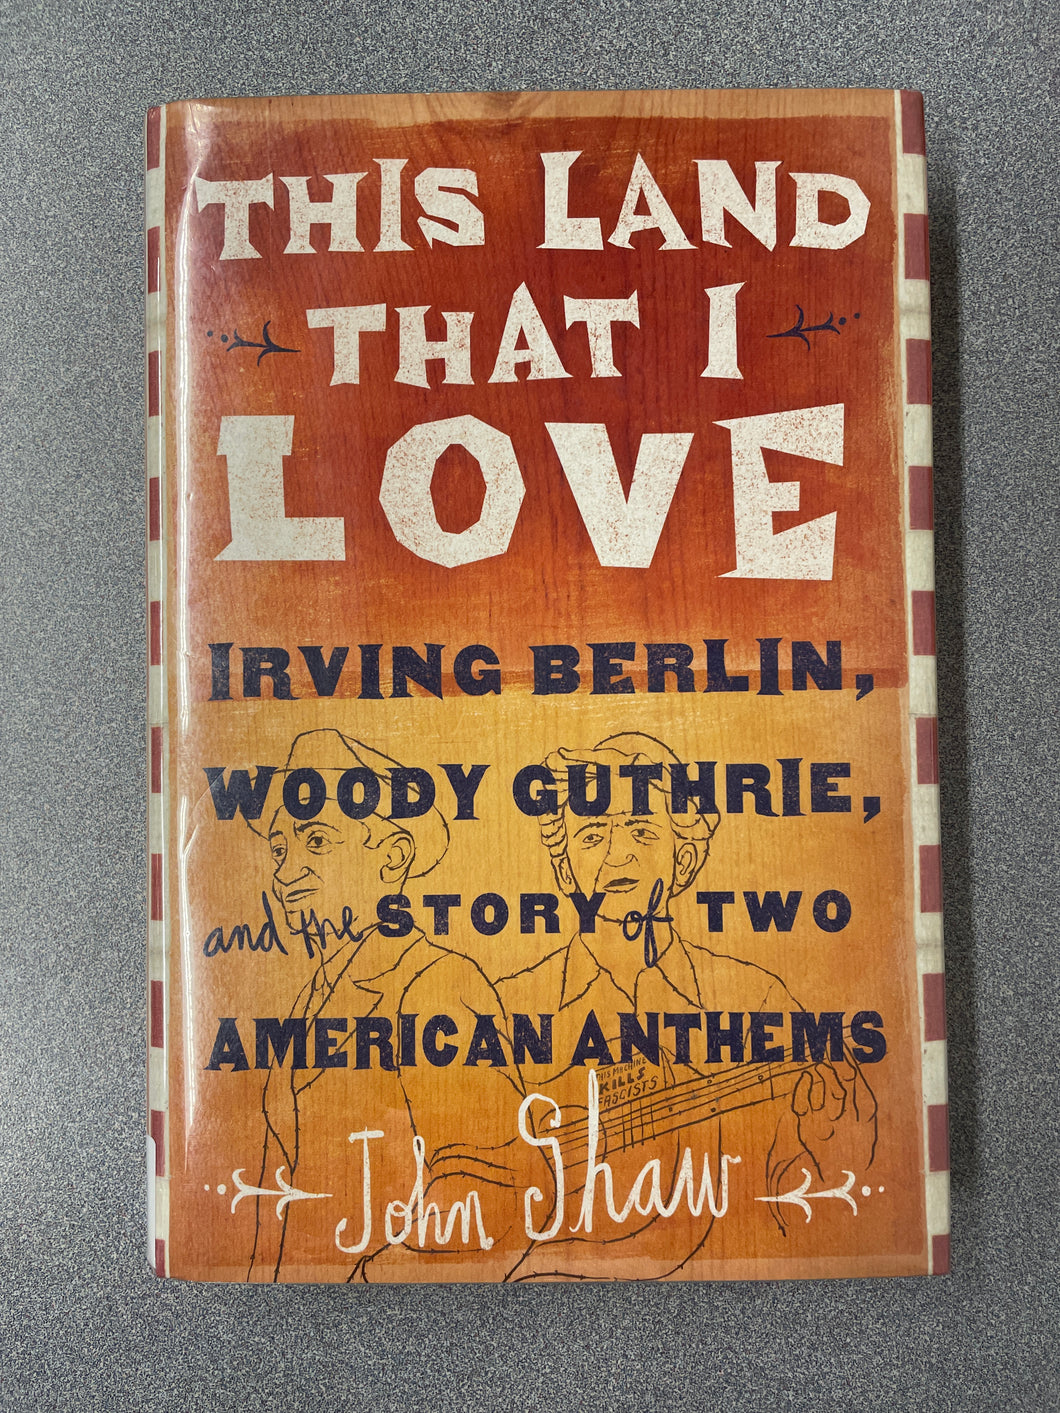 This Land That I Love: Irving Berlin, Woody Guthrie, and the Story of Two American Anthems, Shaw, John [2013] MU 3/23